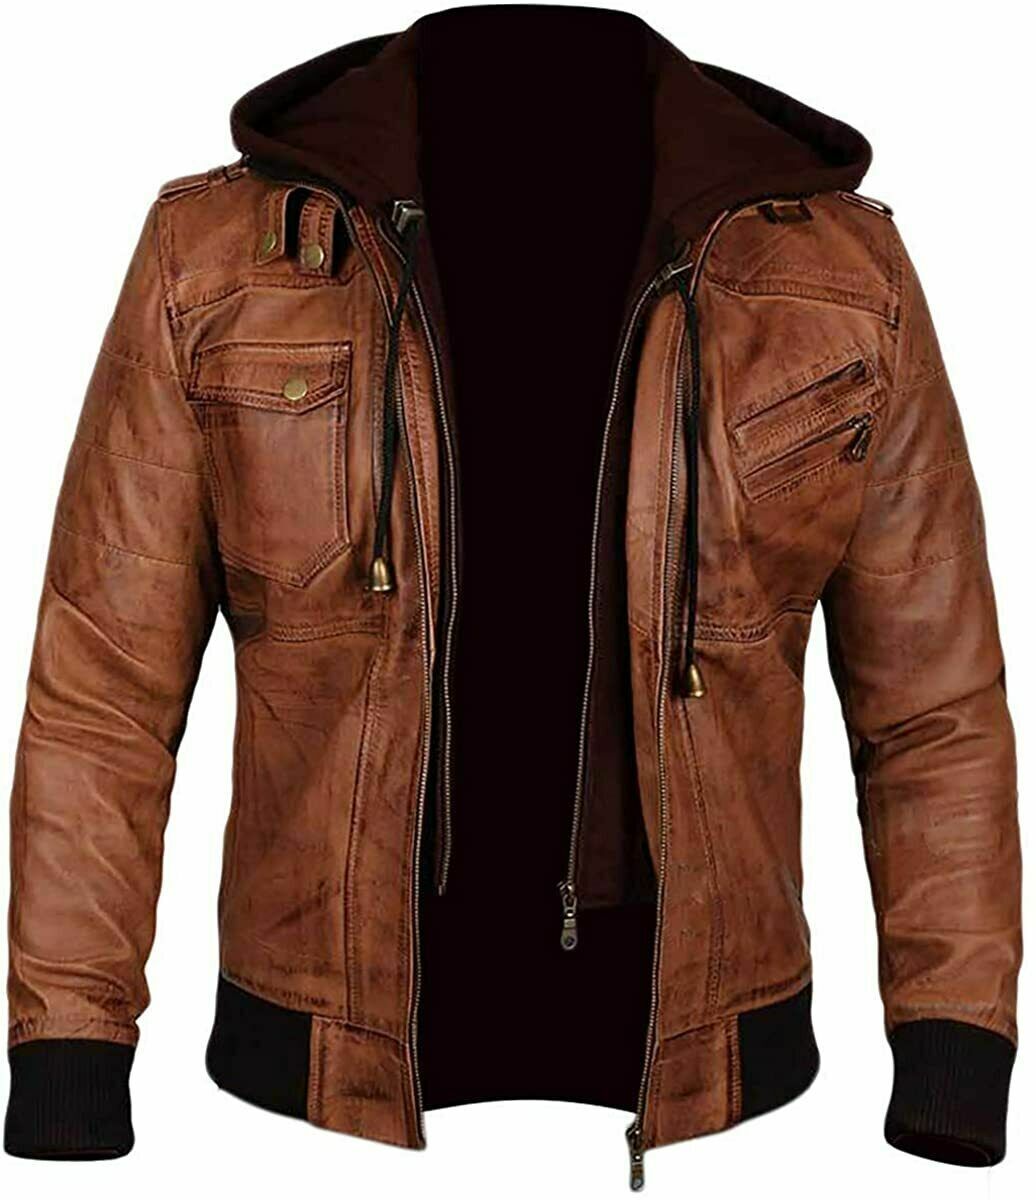 Edinburgh Brown Leather Jacket With Removable Hood